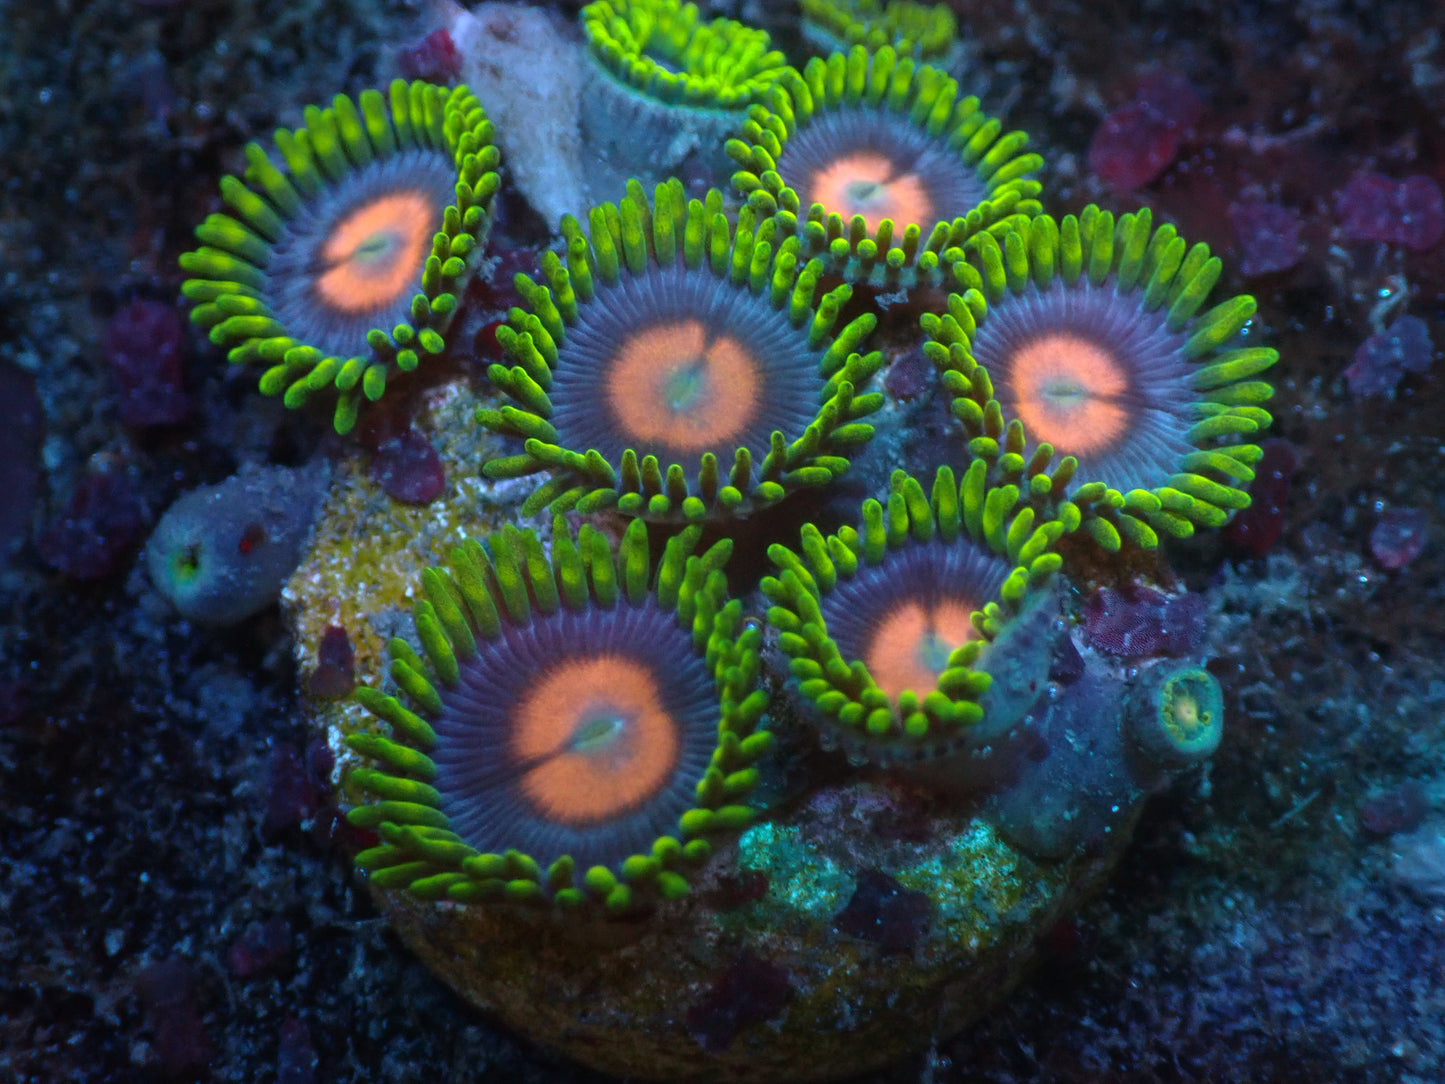 Blowpop Zoas Auctions 5/3 ended